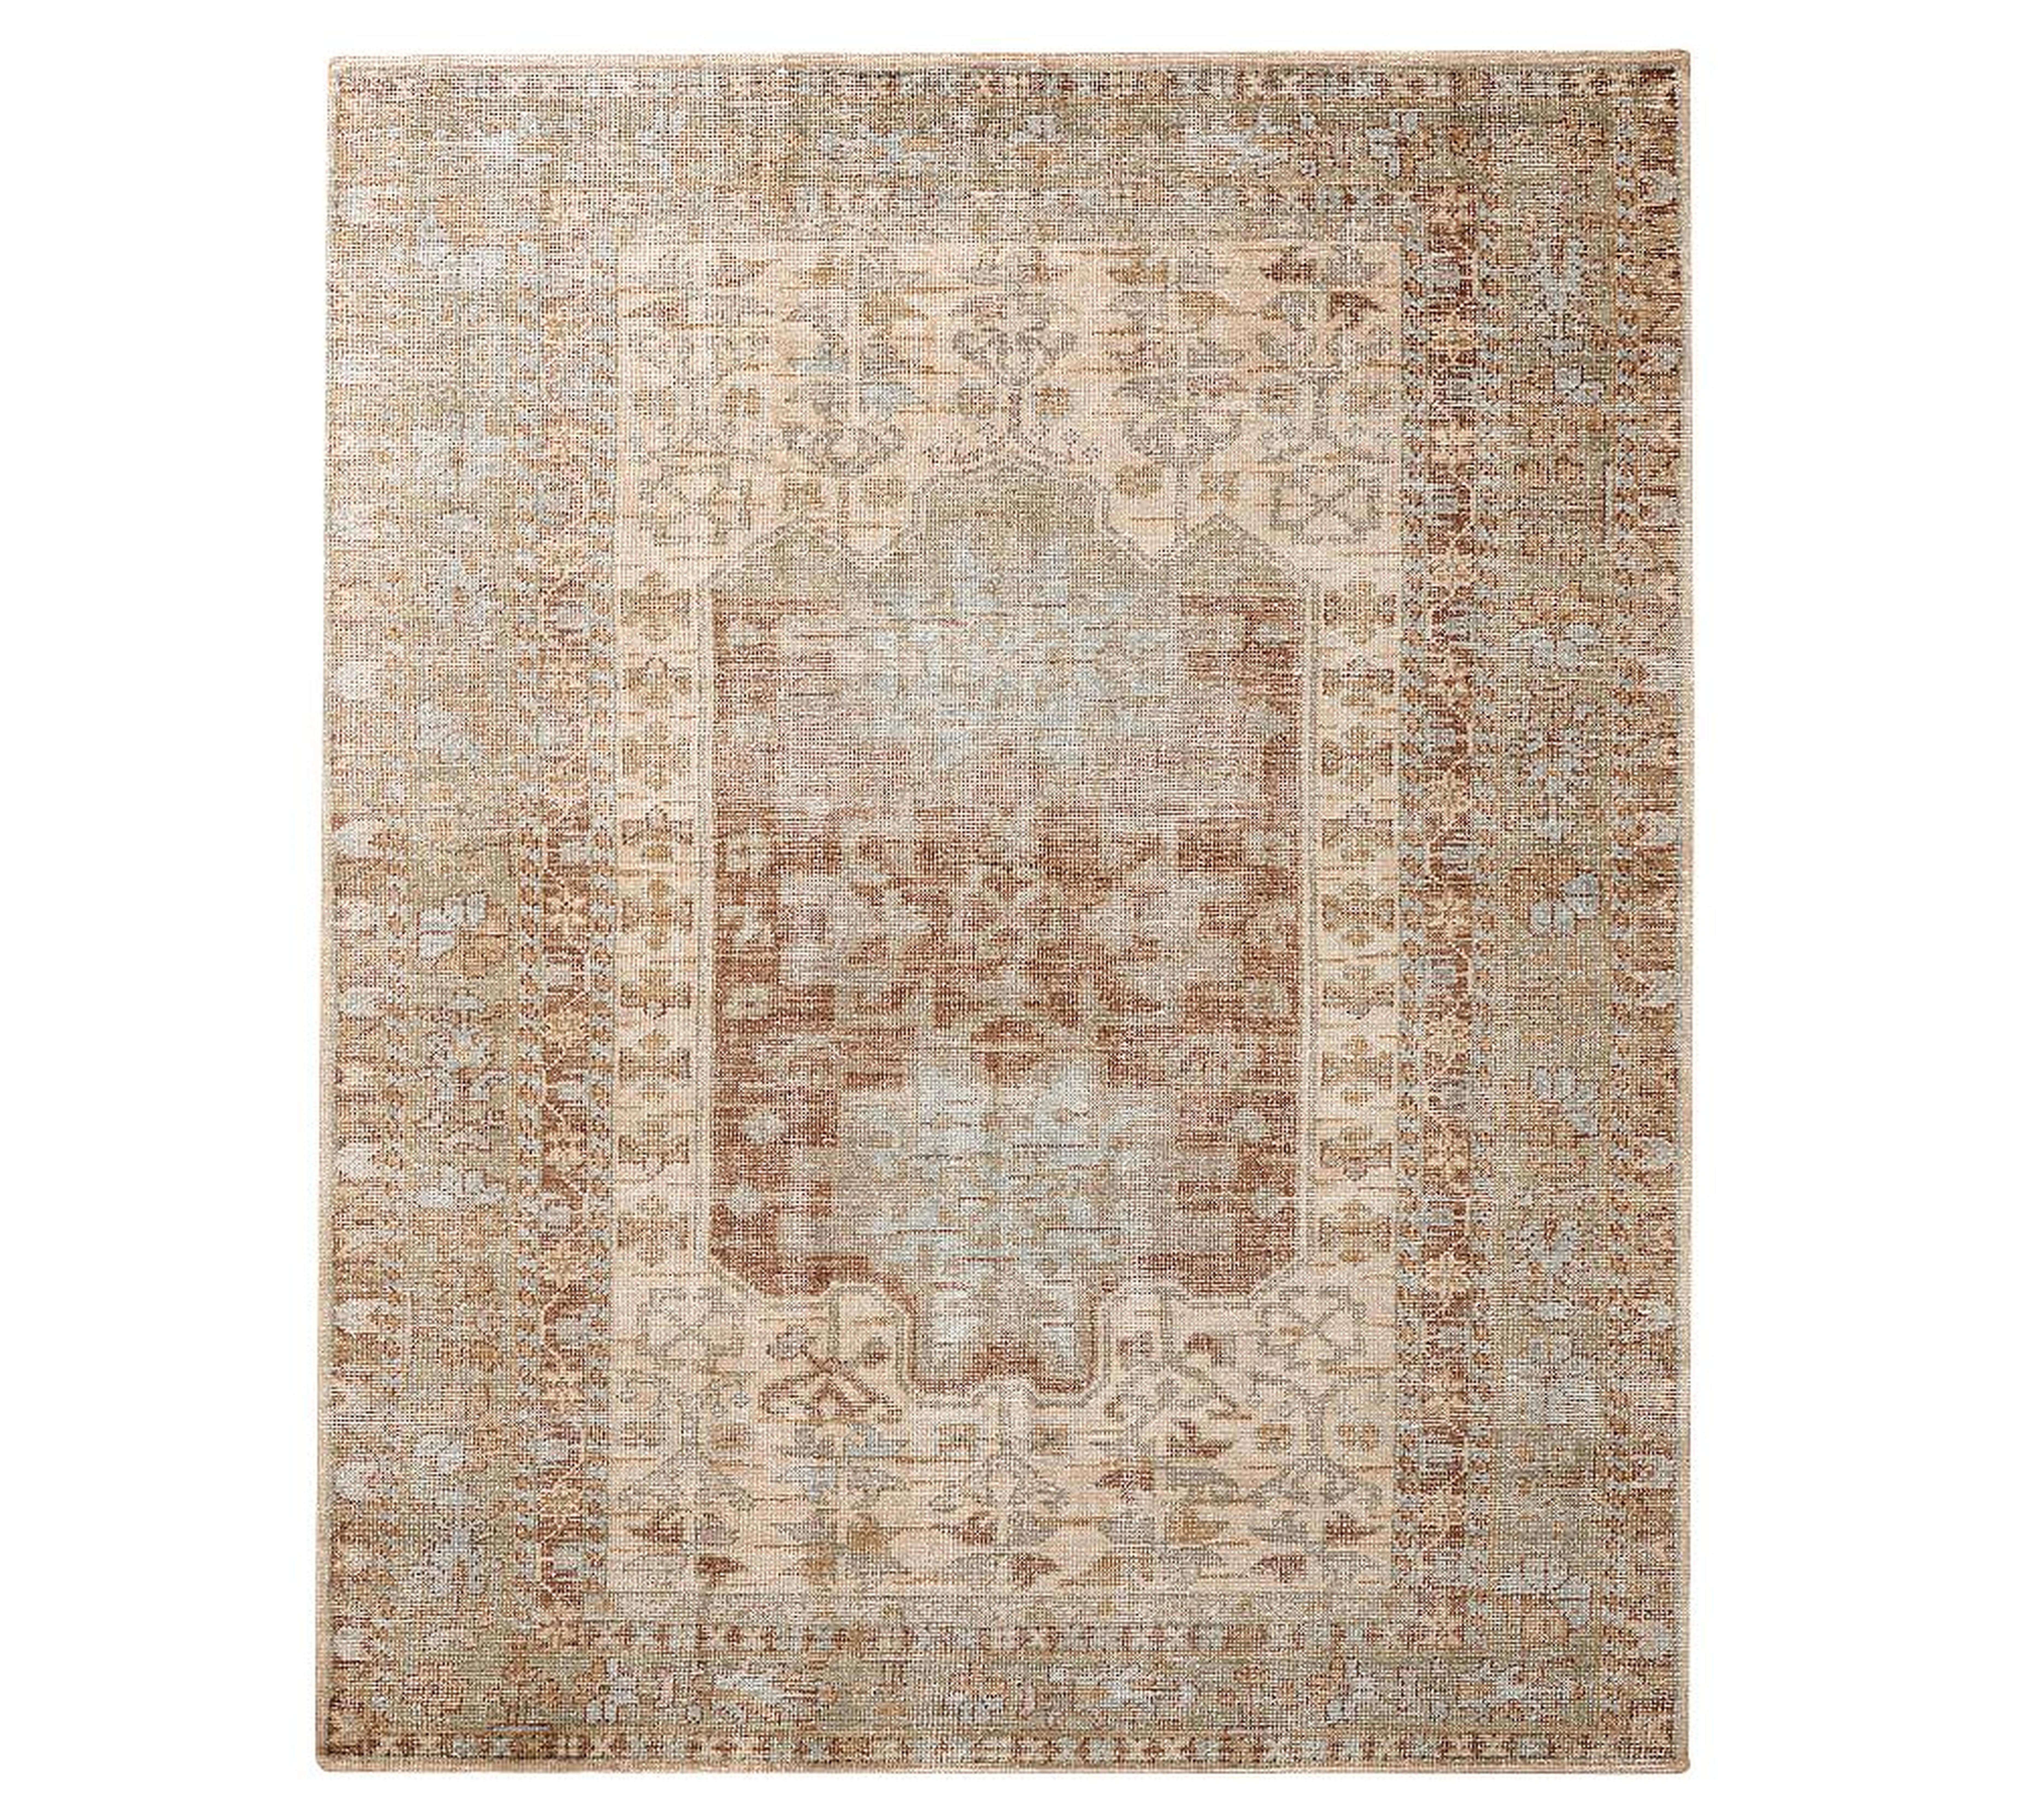 Arlet Hand-Knotted Wool Rug, 9 x 12', Multi - Pottery Barn